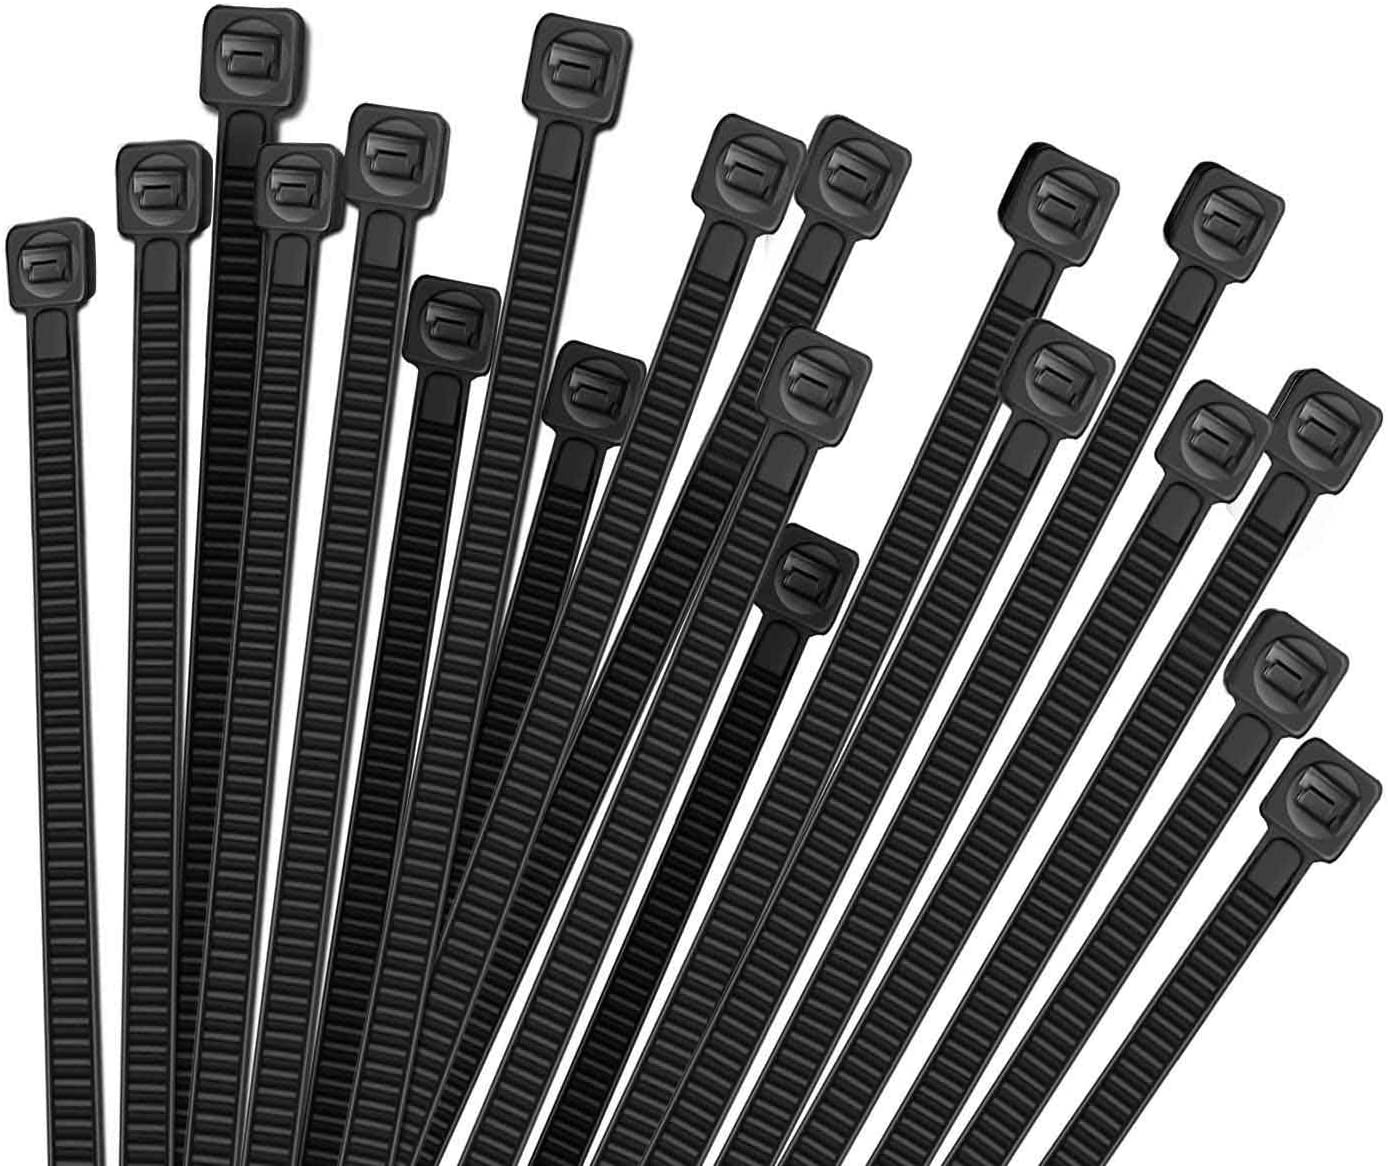 Kuber Industries Self Locking Cable Ties (150 mm x 3.0 mm - Pack of 100 Pcs) Black